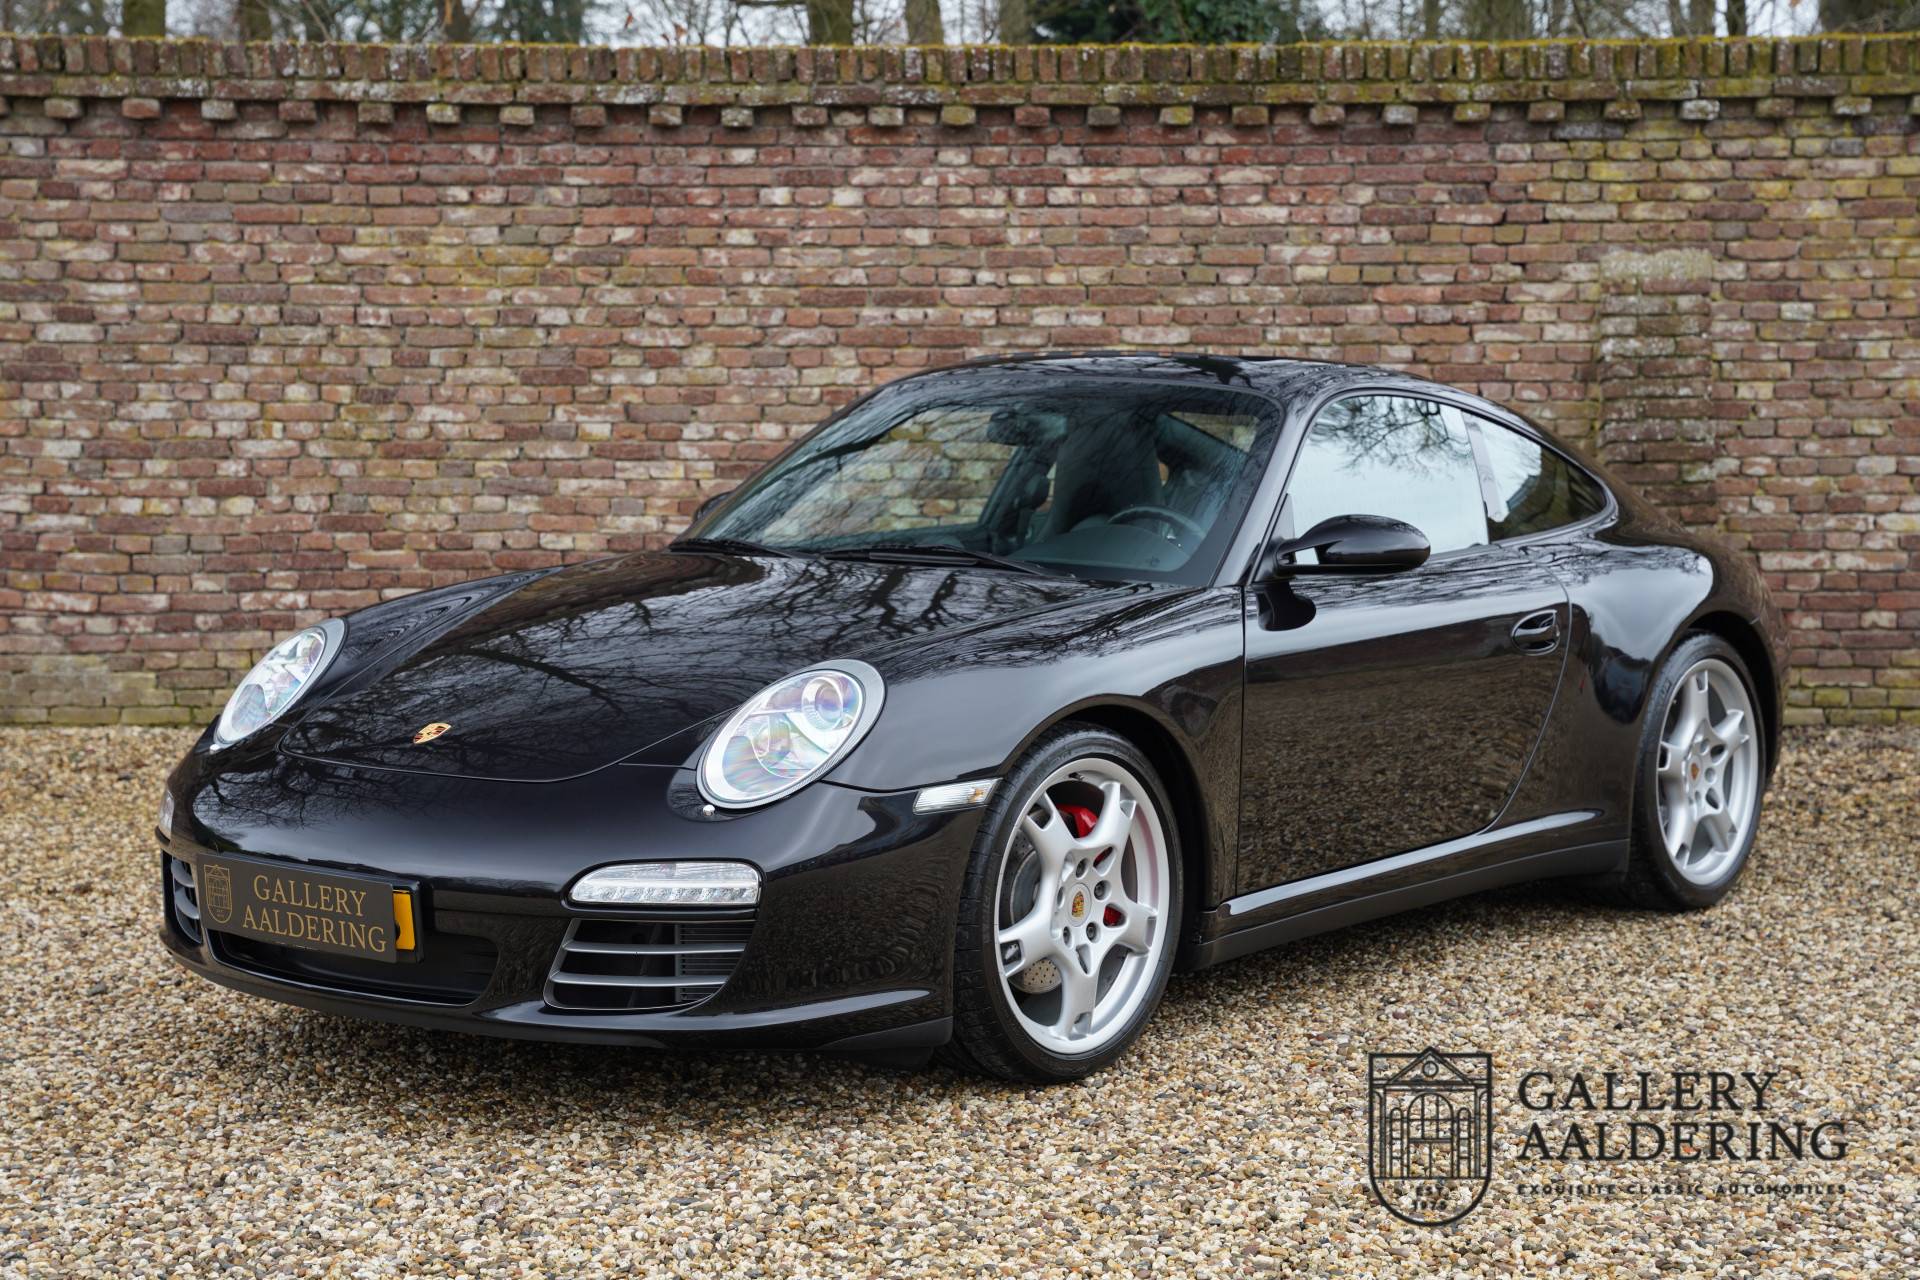 For Sale: Porsche 911 Carrera 4S (2008) offered for GBP 55,953